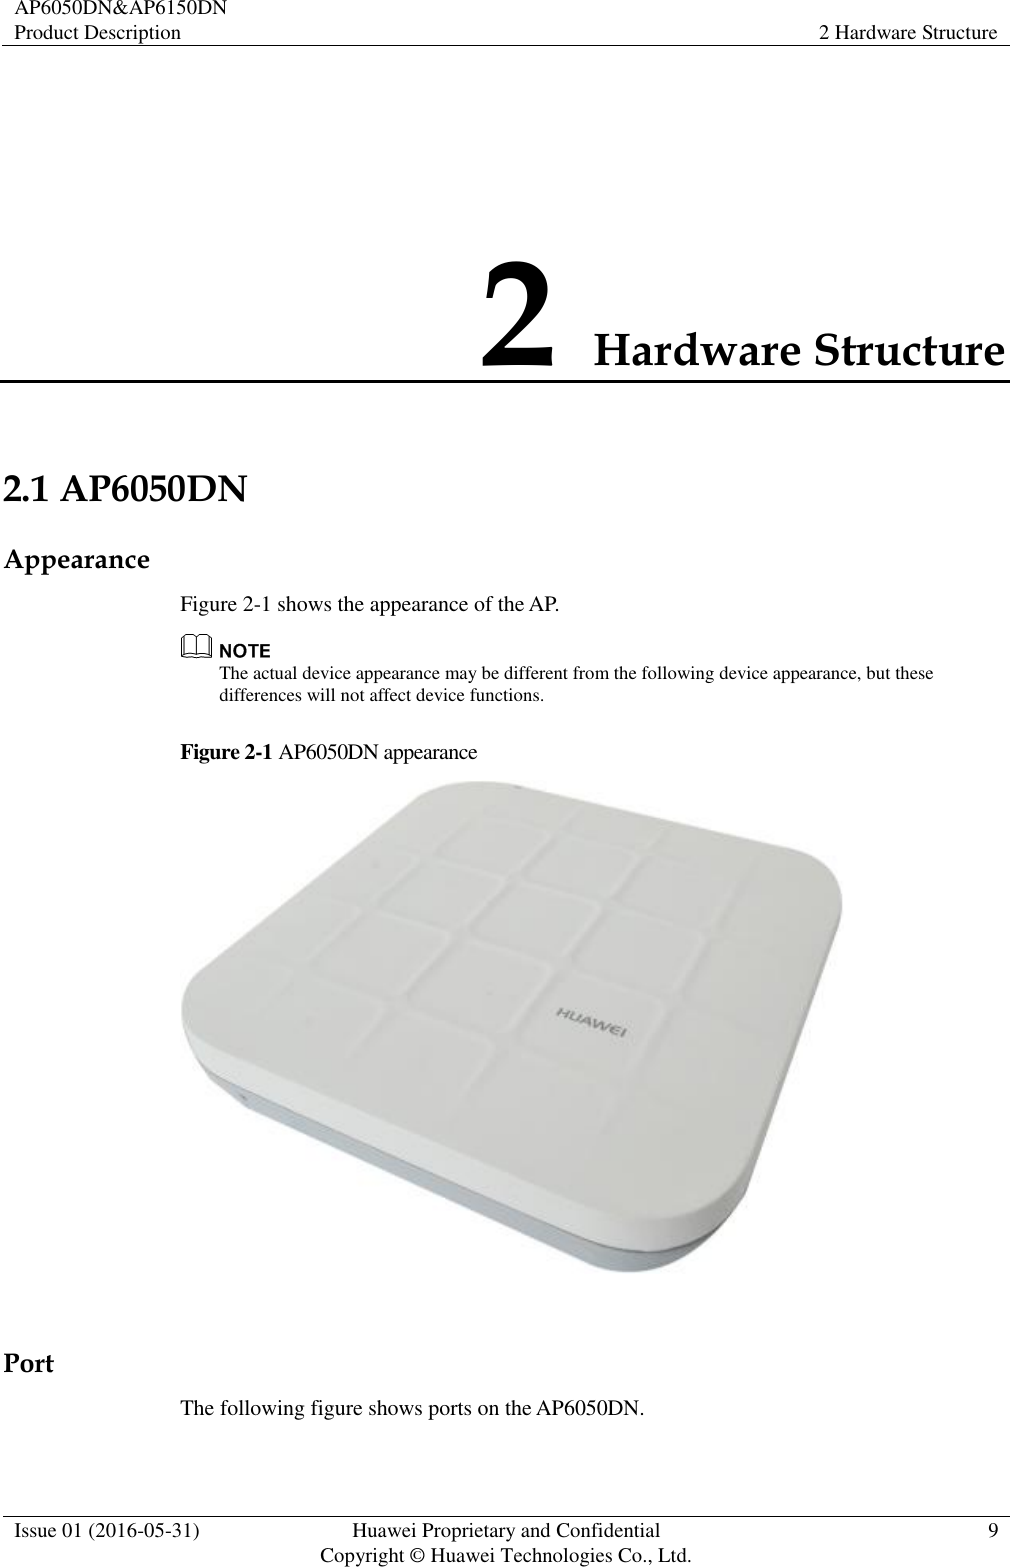 AP6050DN&amp;AP6150DN Product Description 2 Hardware Structure  Issue 01 (2016-05-31) Huawei Proprietary and Confidential                                     Copyright © Huawei Technologies Co., Ltd. 9  2 Hardware Structure 2.1 AP6050DN Appearance Figure 2-1 shows the appearance of the AP.  The actual device appearance may be different from the following device appearance, but these differences will not affect device functions. Figure 2-1 AP6050DN appearance   Port The following figure shows ports on the AP6050DN. 